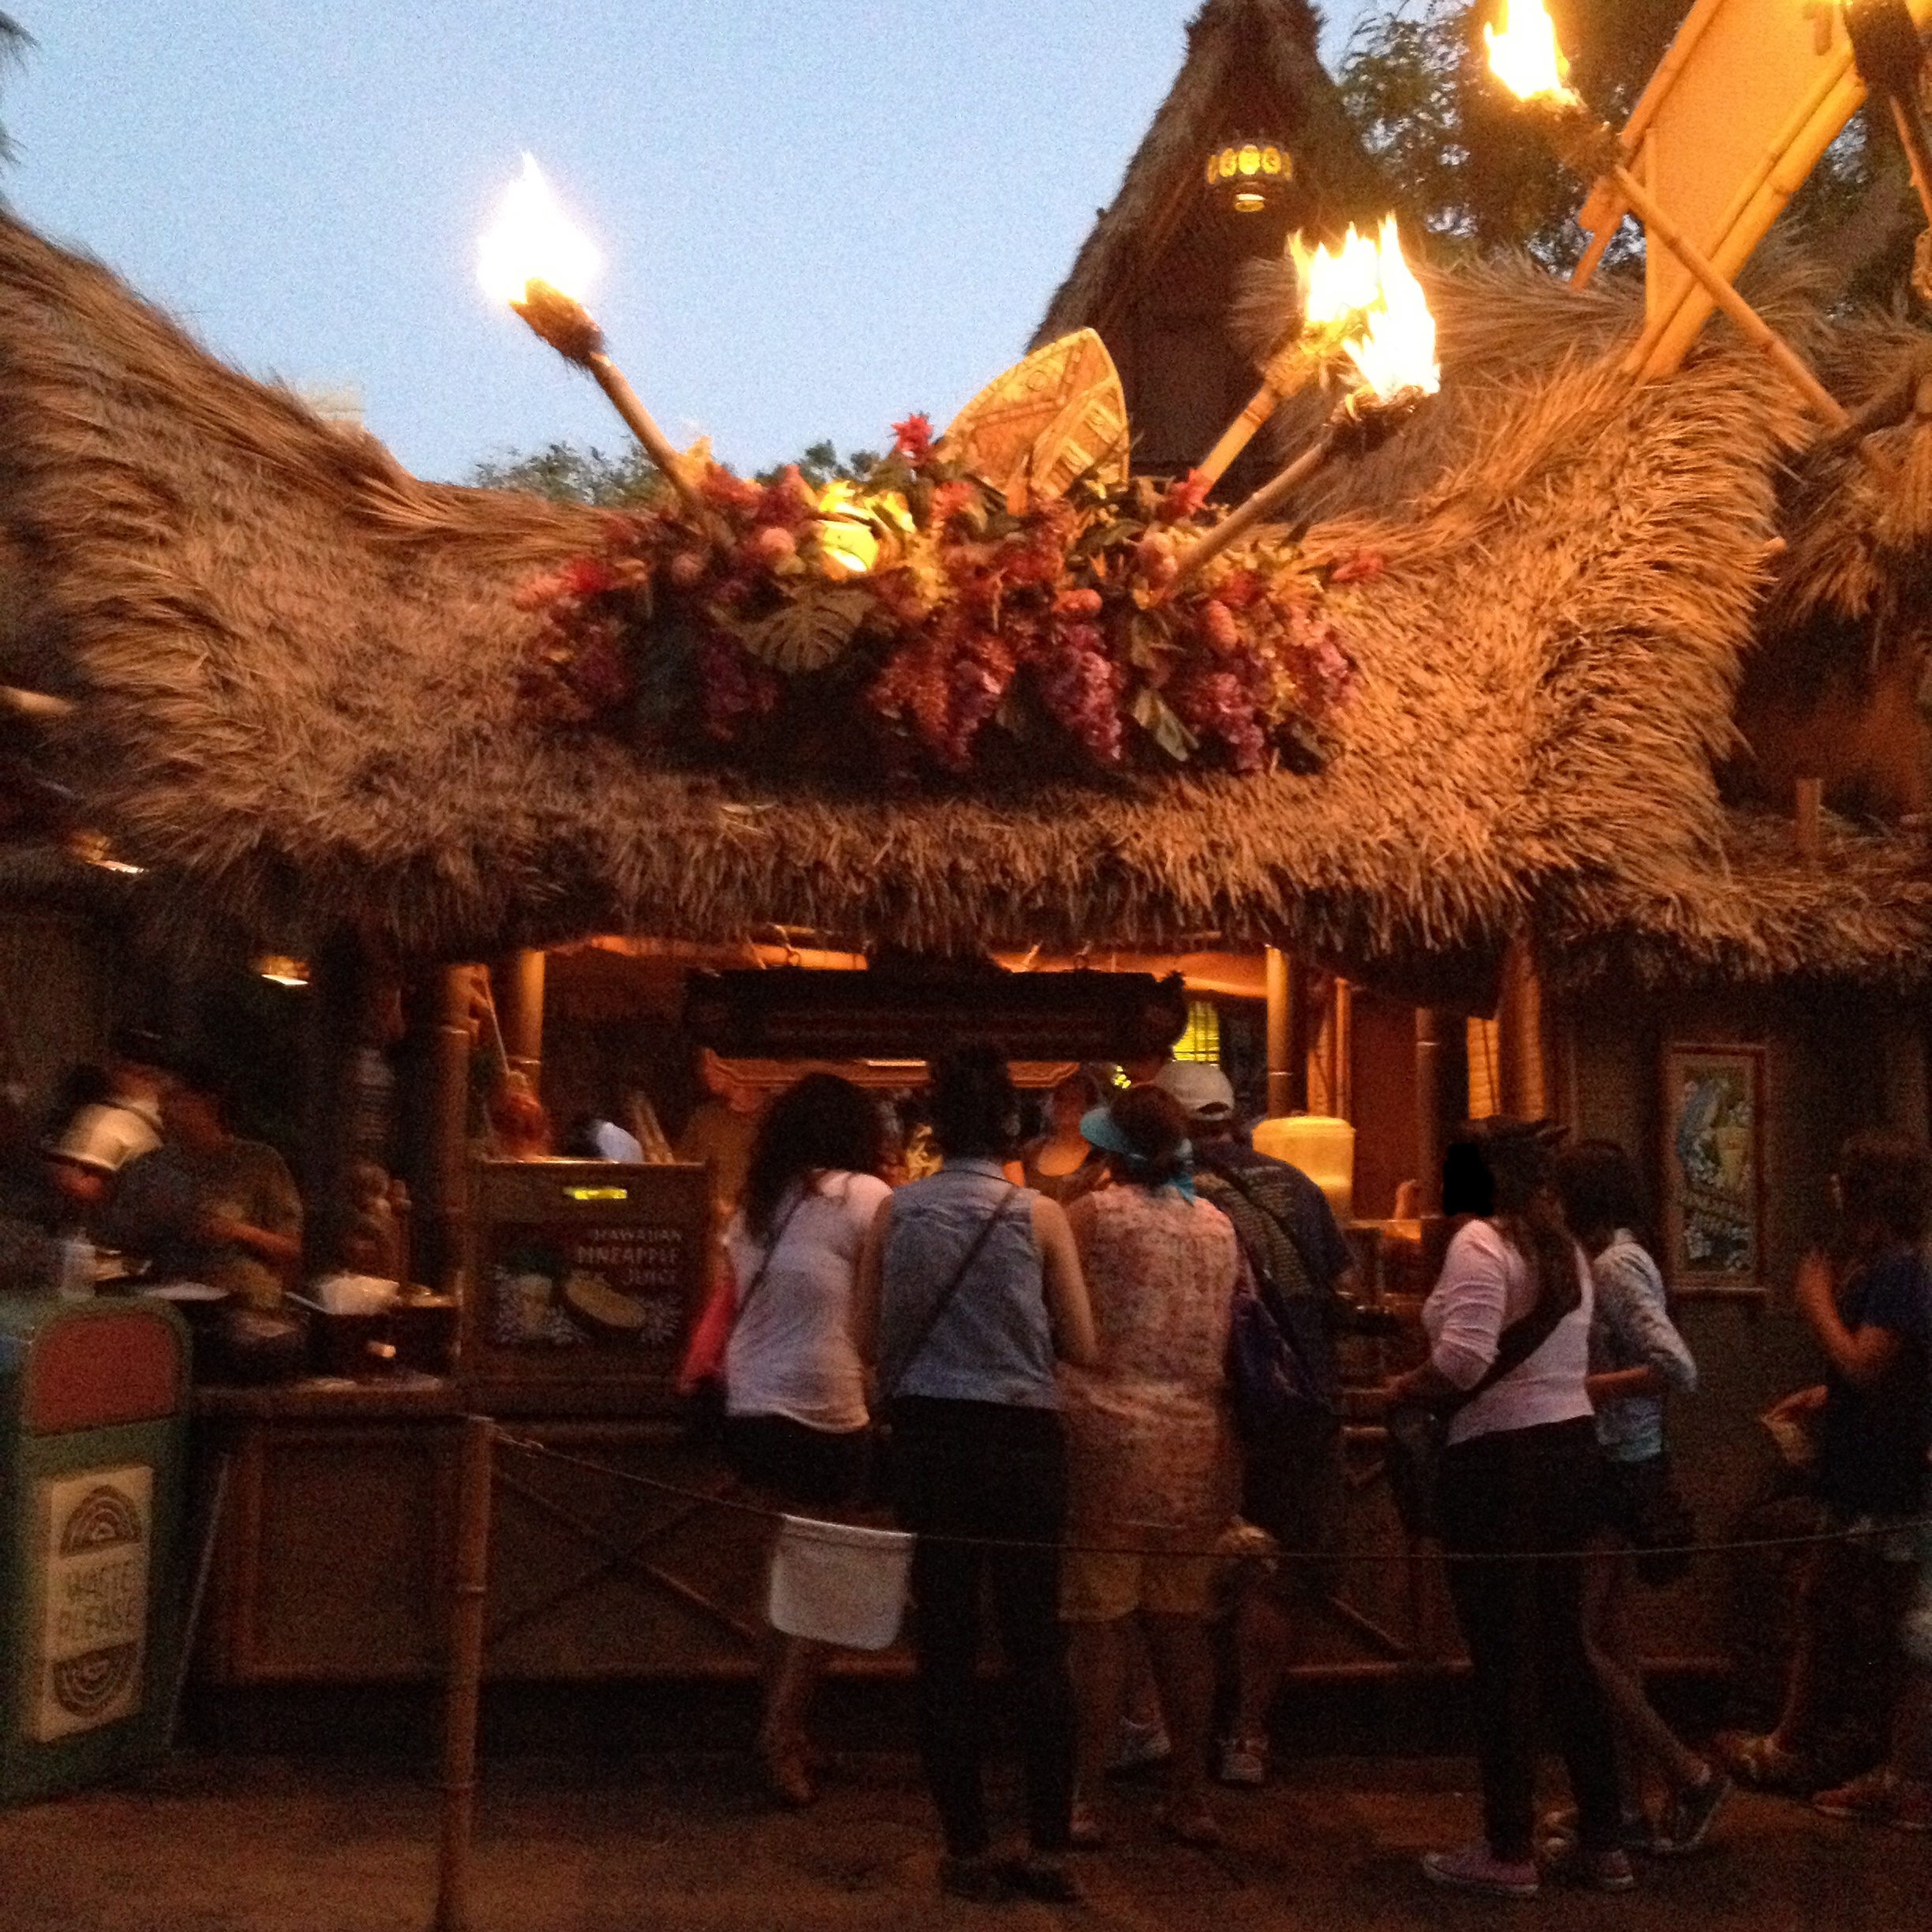 Disney Dining with Pineapple!